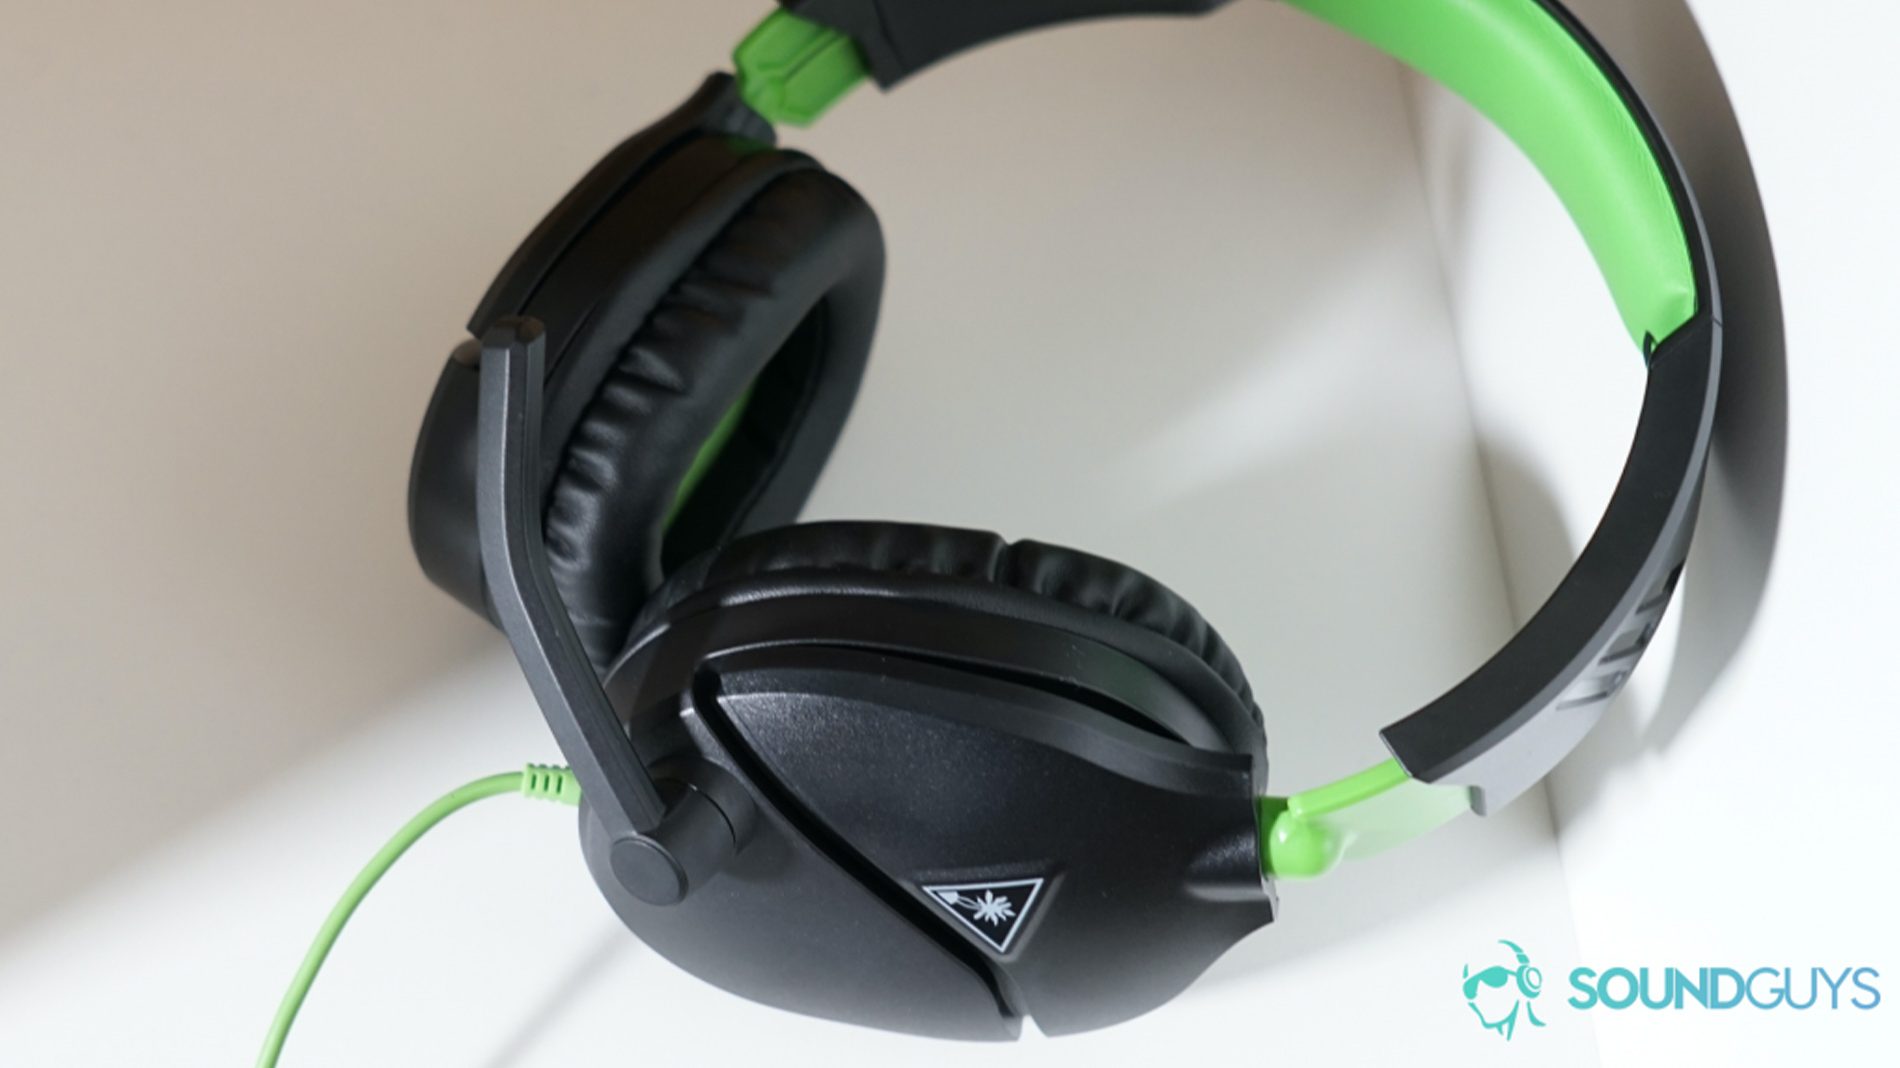 The Turtle Beach Recon 70 gaming headset on an off-white surface.